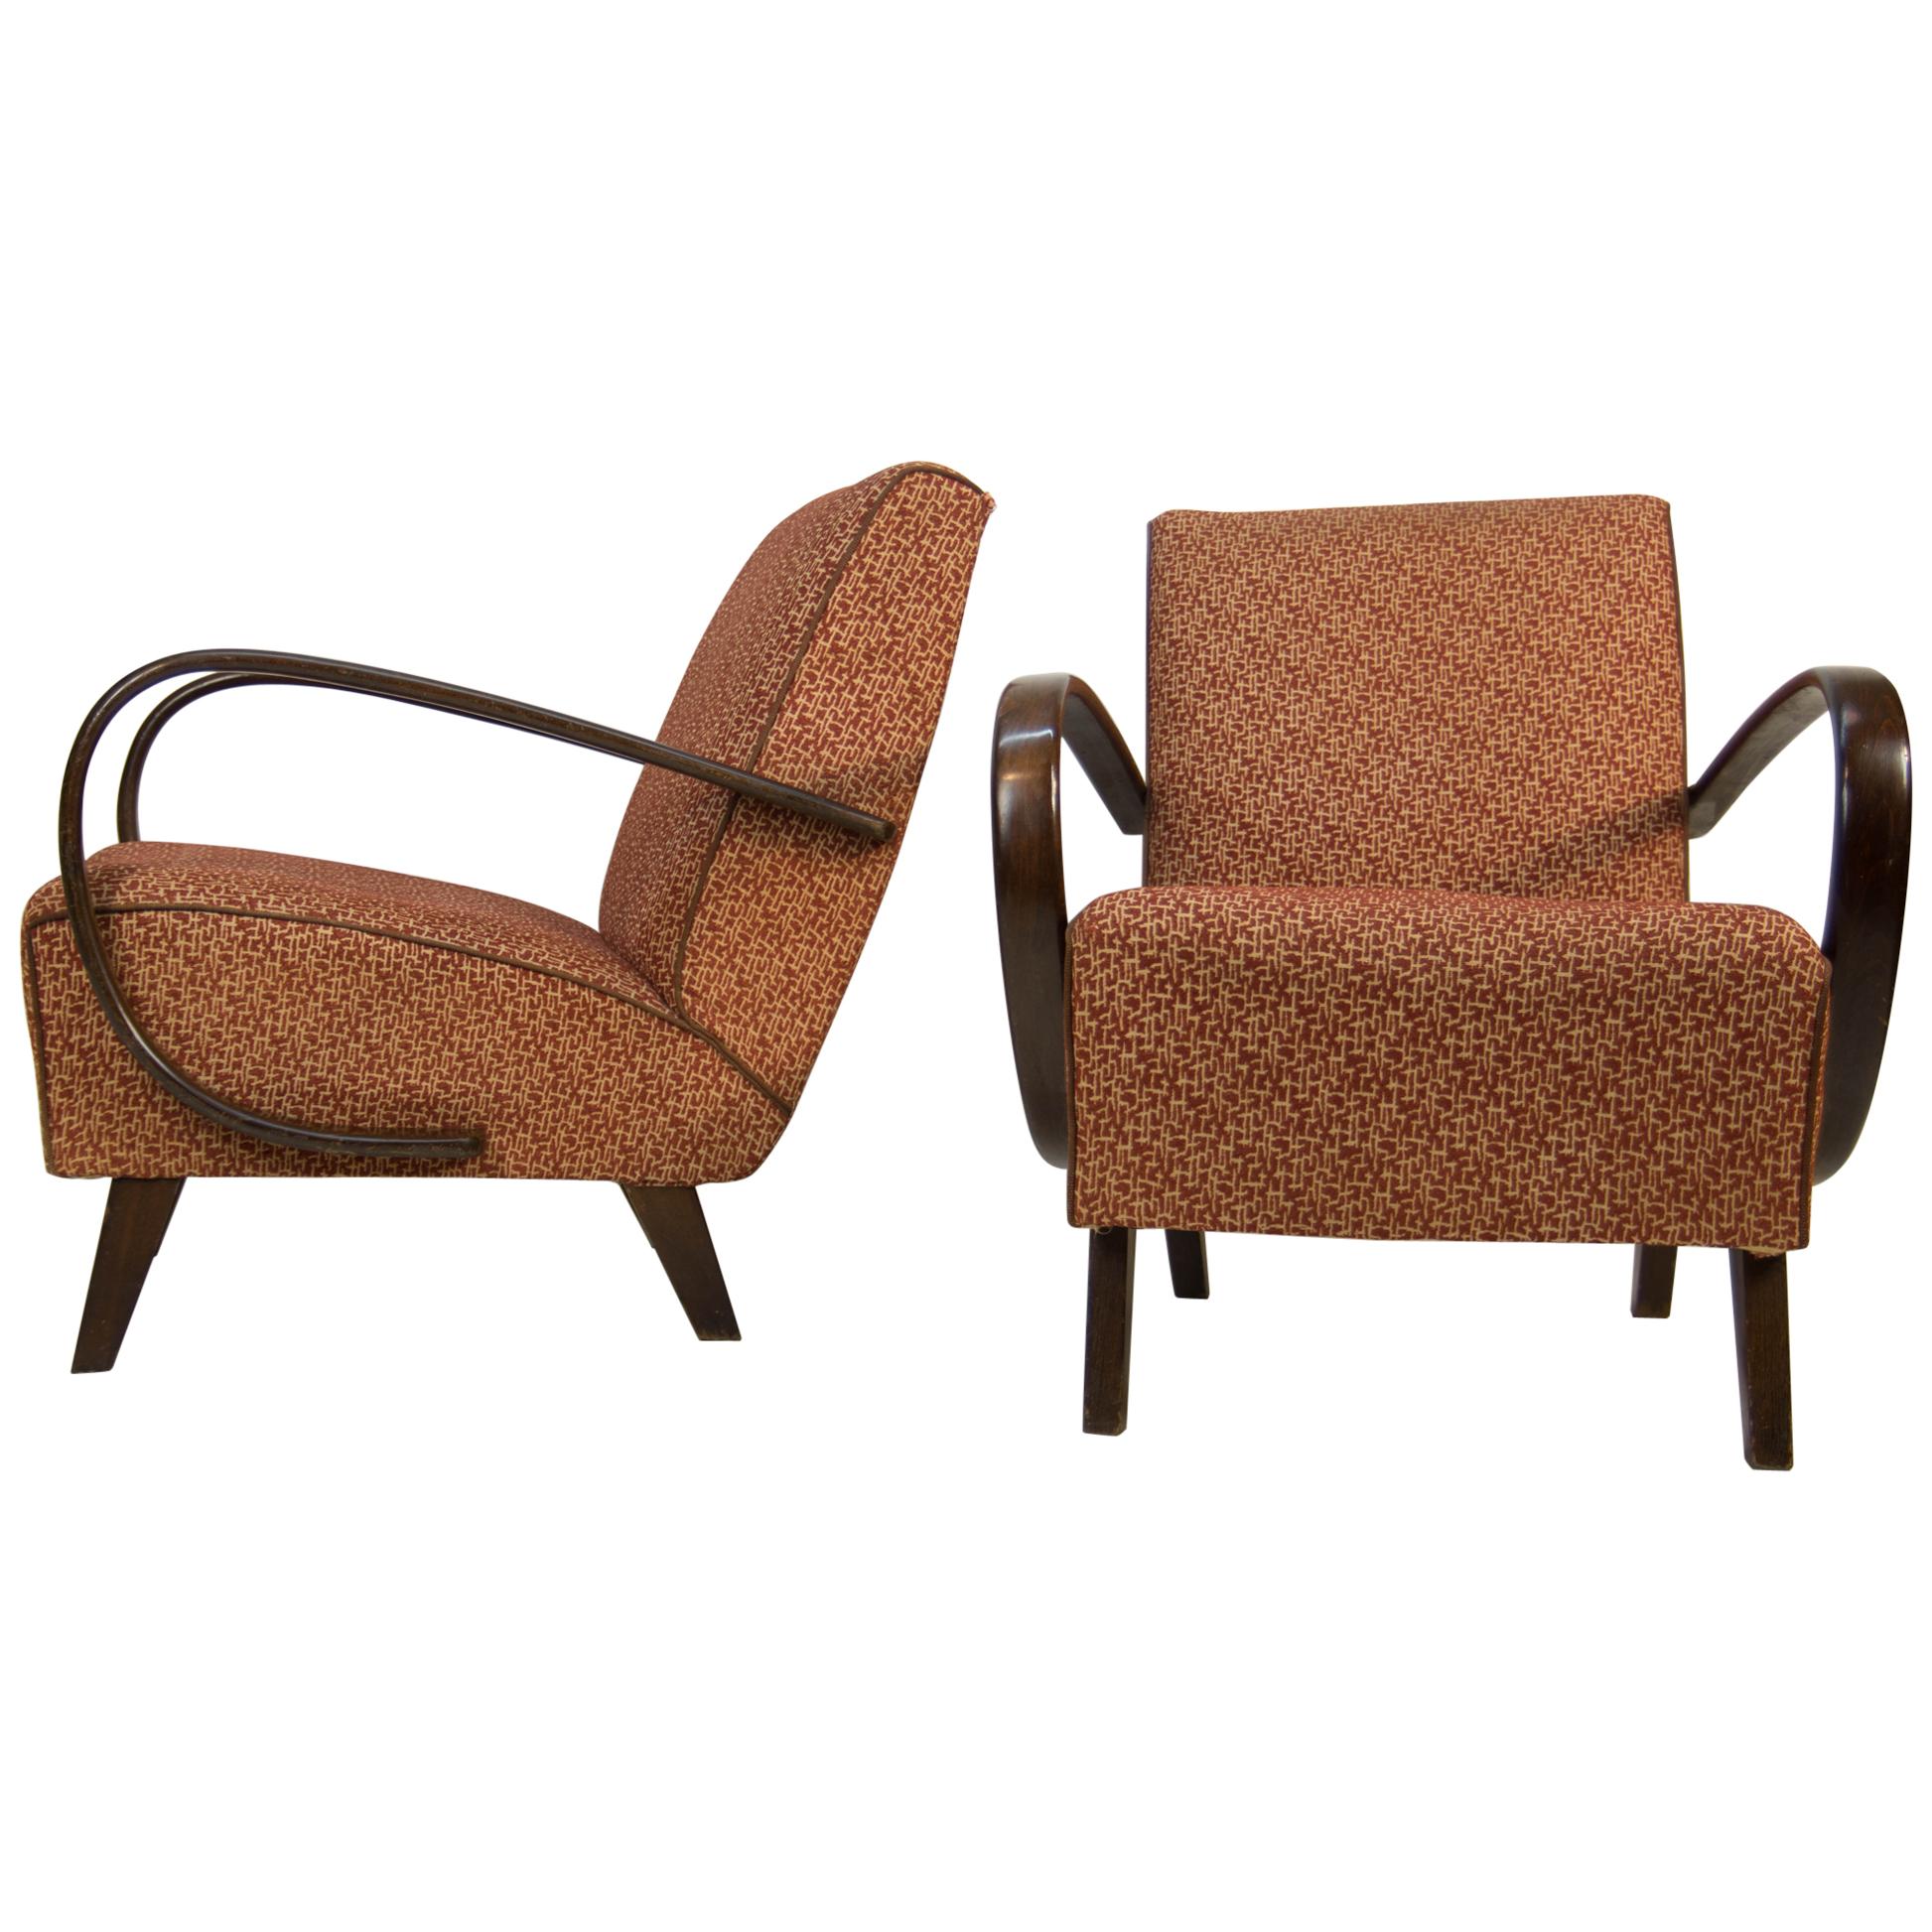 Set of Two Armchairs by Jindrich Halabala, 1940s